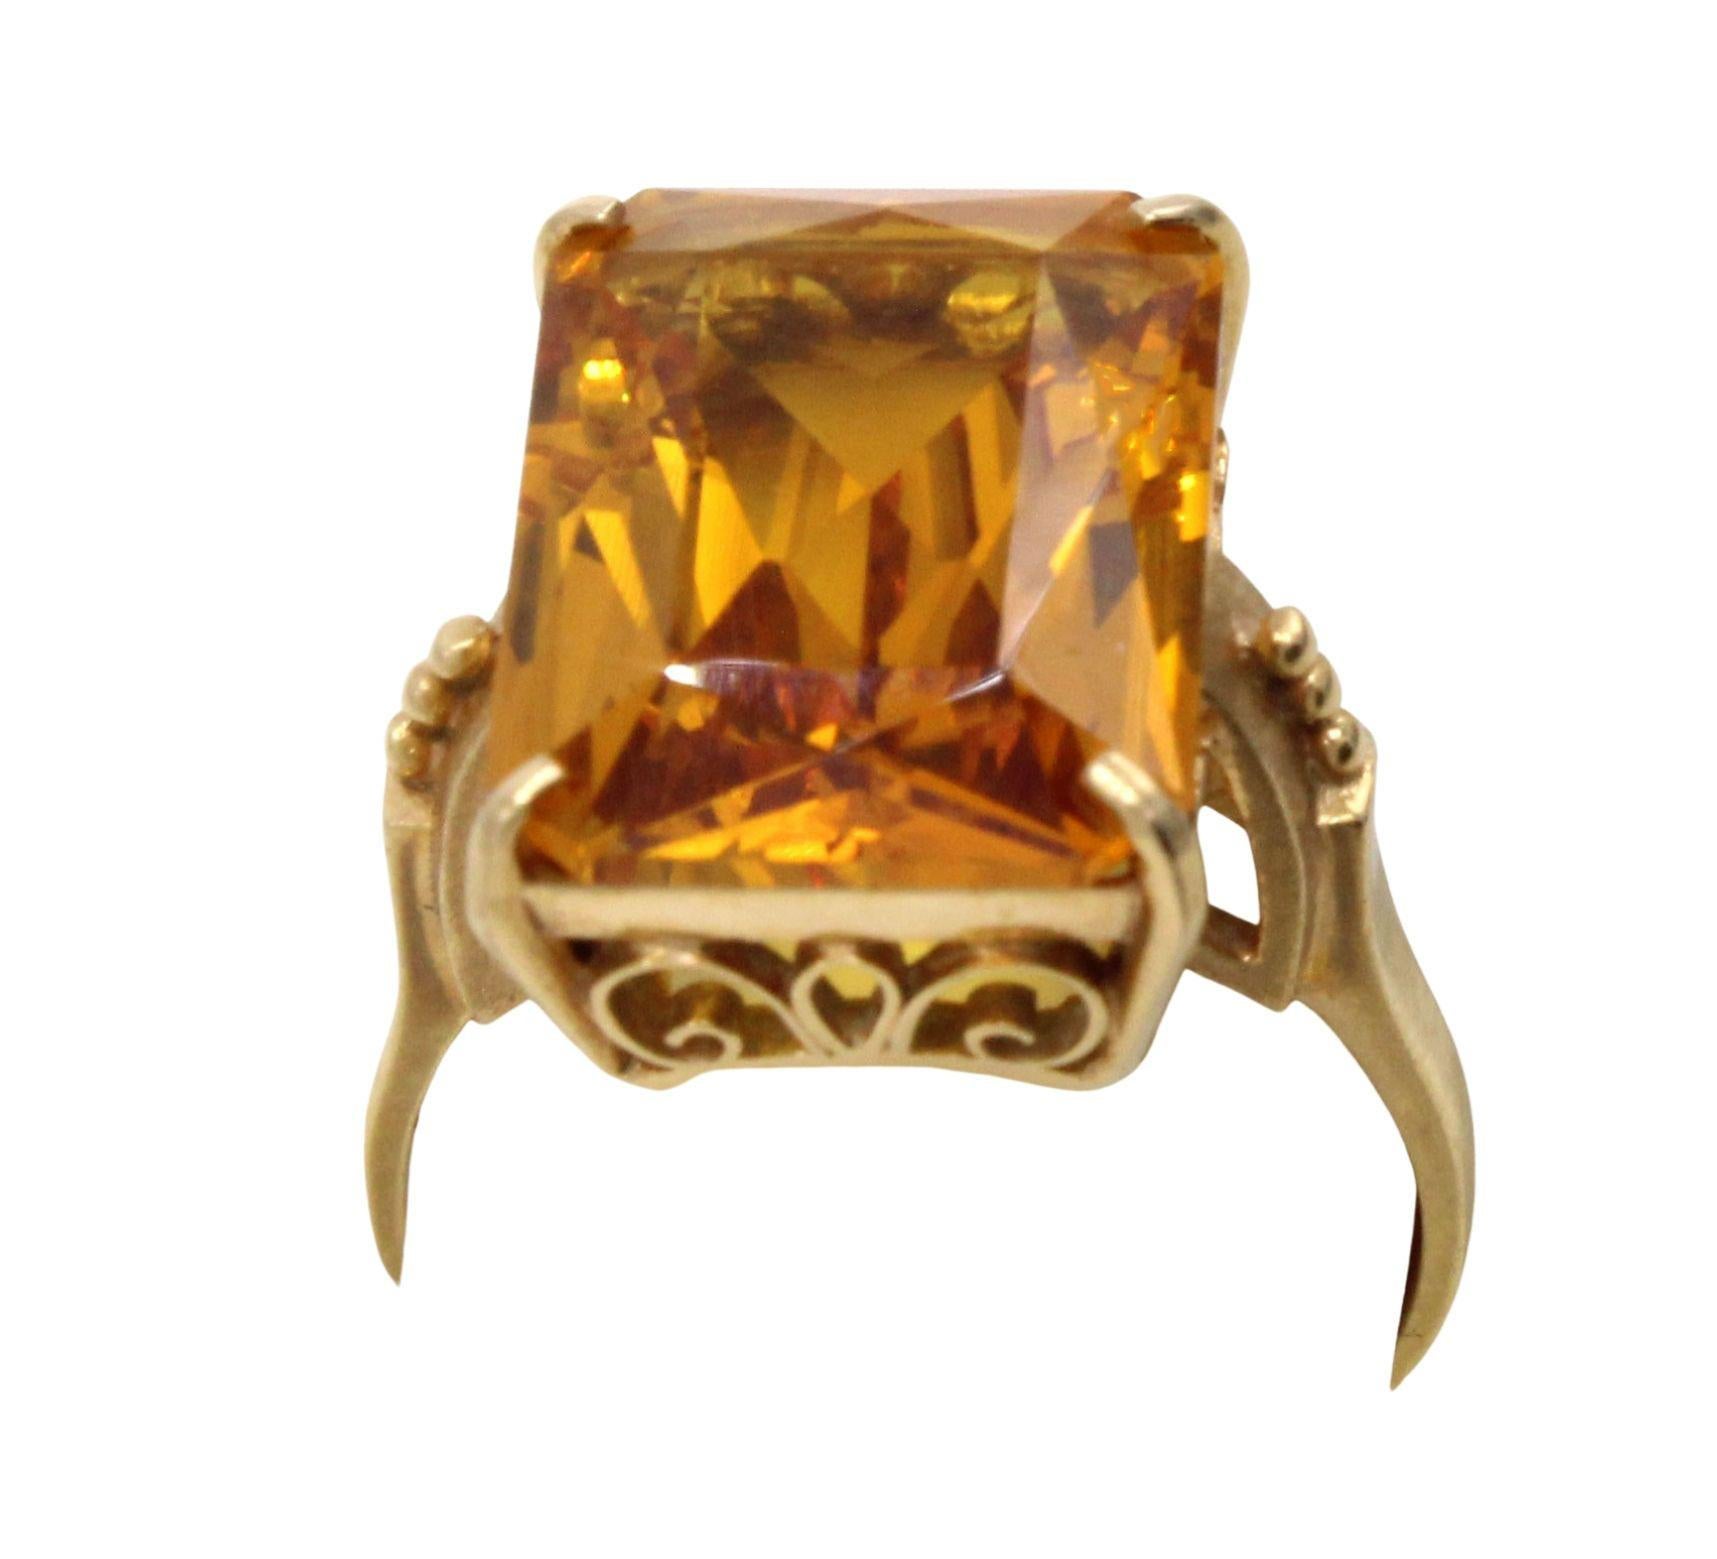 Beautifully designed and masterfully handcrafted in 18 karat yellow gold, this Retro ring from ca 1945 features a vibrant Golden Citrine measured to weigh approximately 8.60 carats. The rectangular modified emerald cut, with additional facets on the